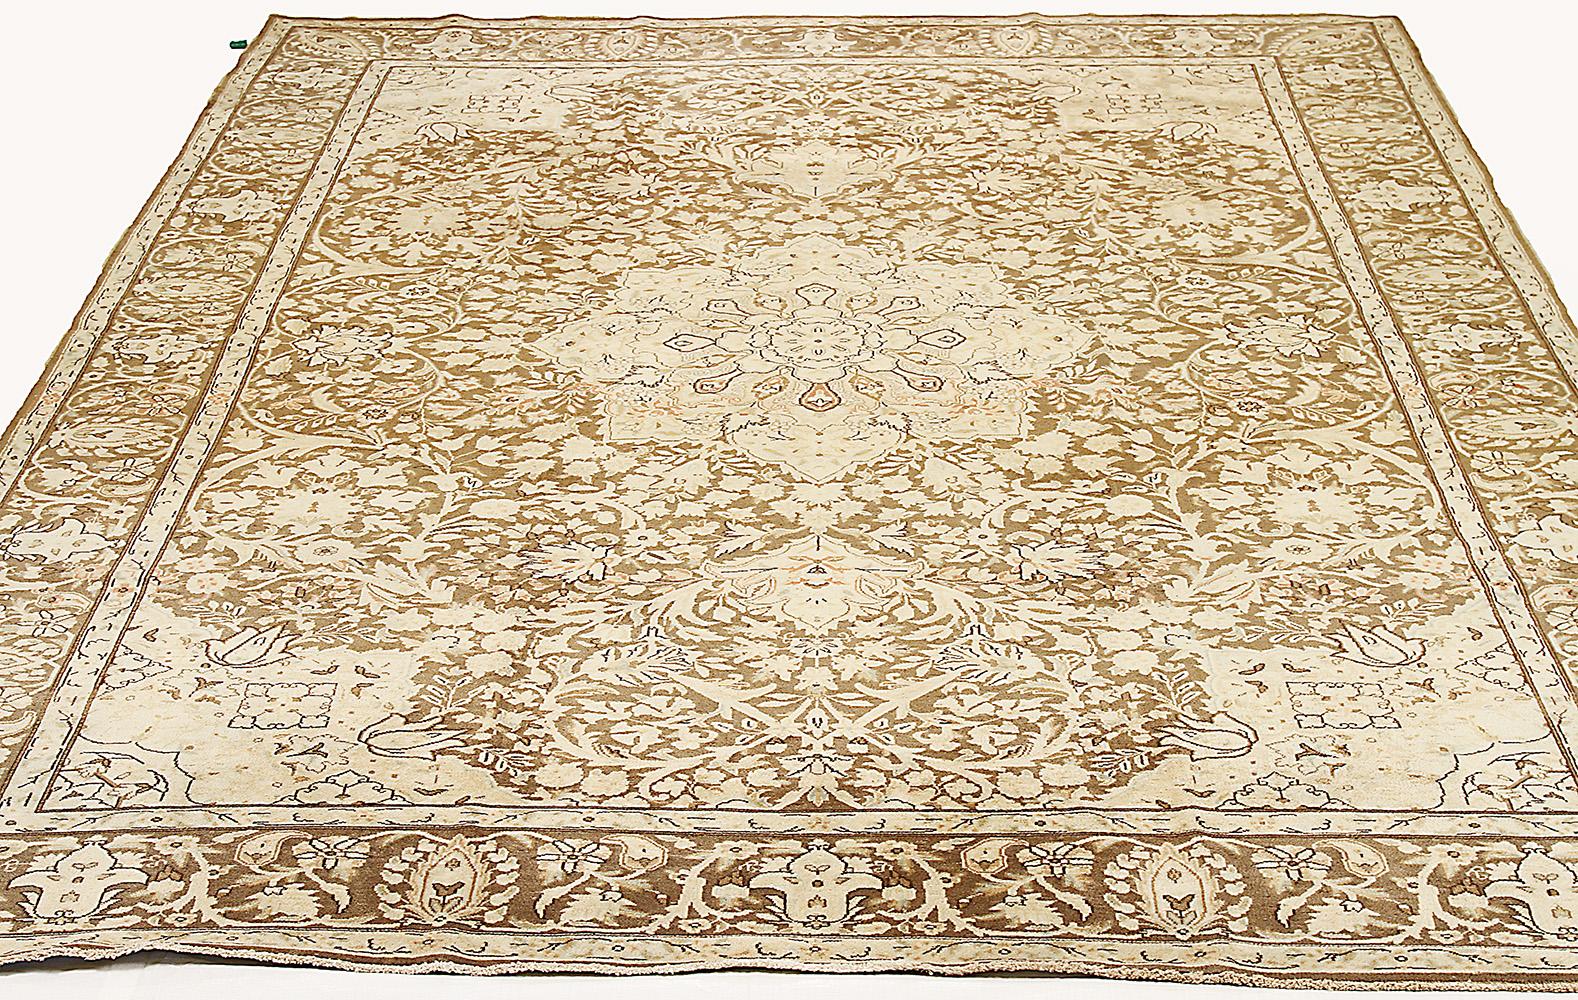 Antique Persian rug handwoven from the finest sheep’s wool and colored with all-natural vegetable dyes that are safe for humans and pets. It’s a traditional Kerman weaving featuring an elegant central medallion with an ensemble of floral designs in